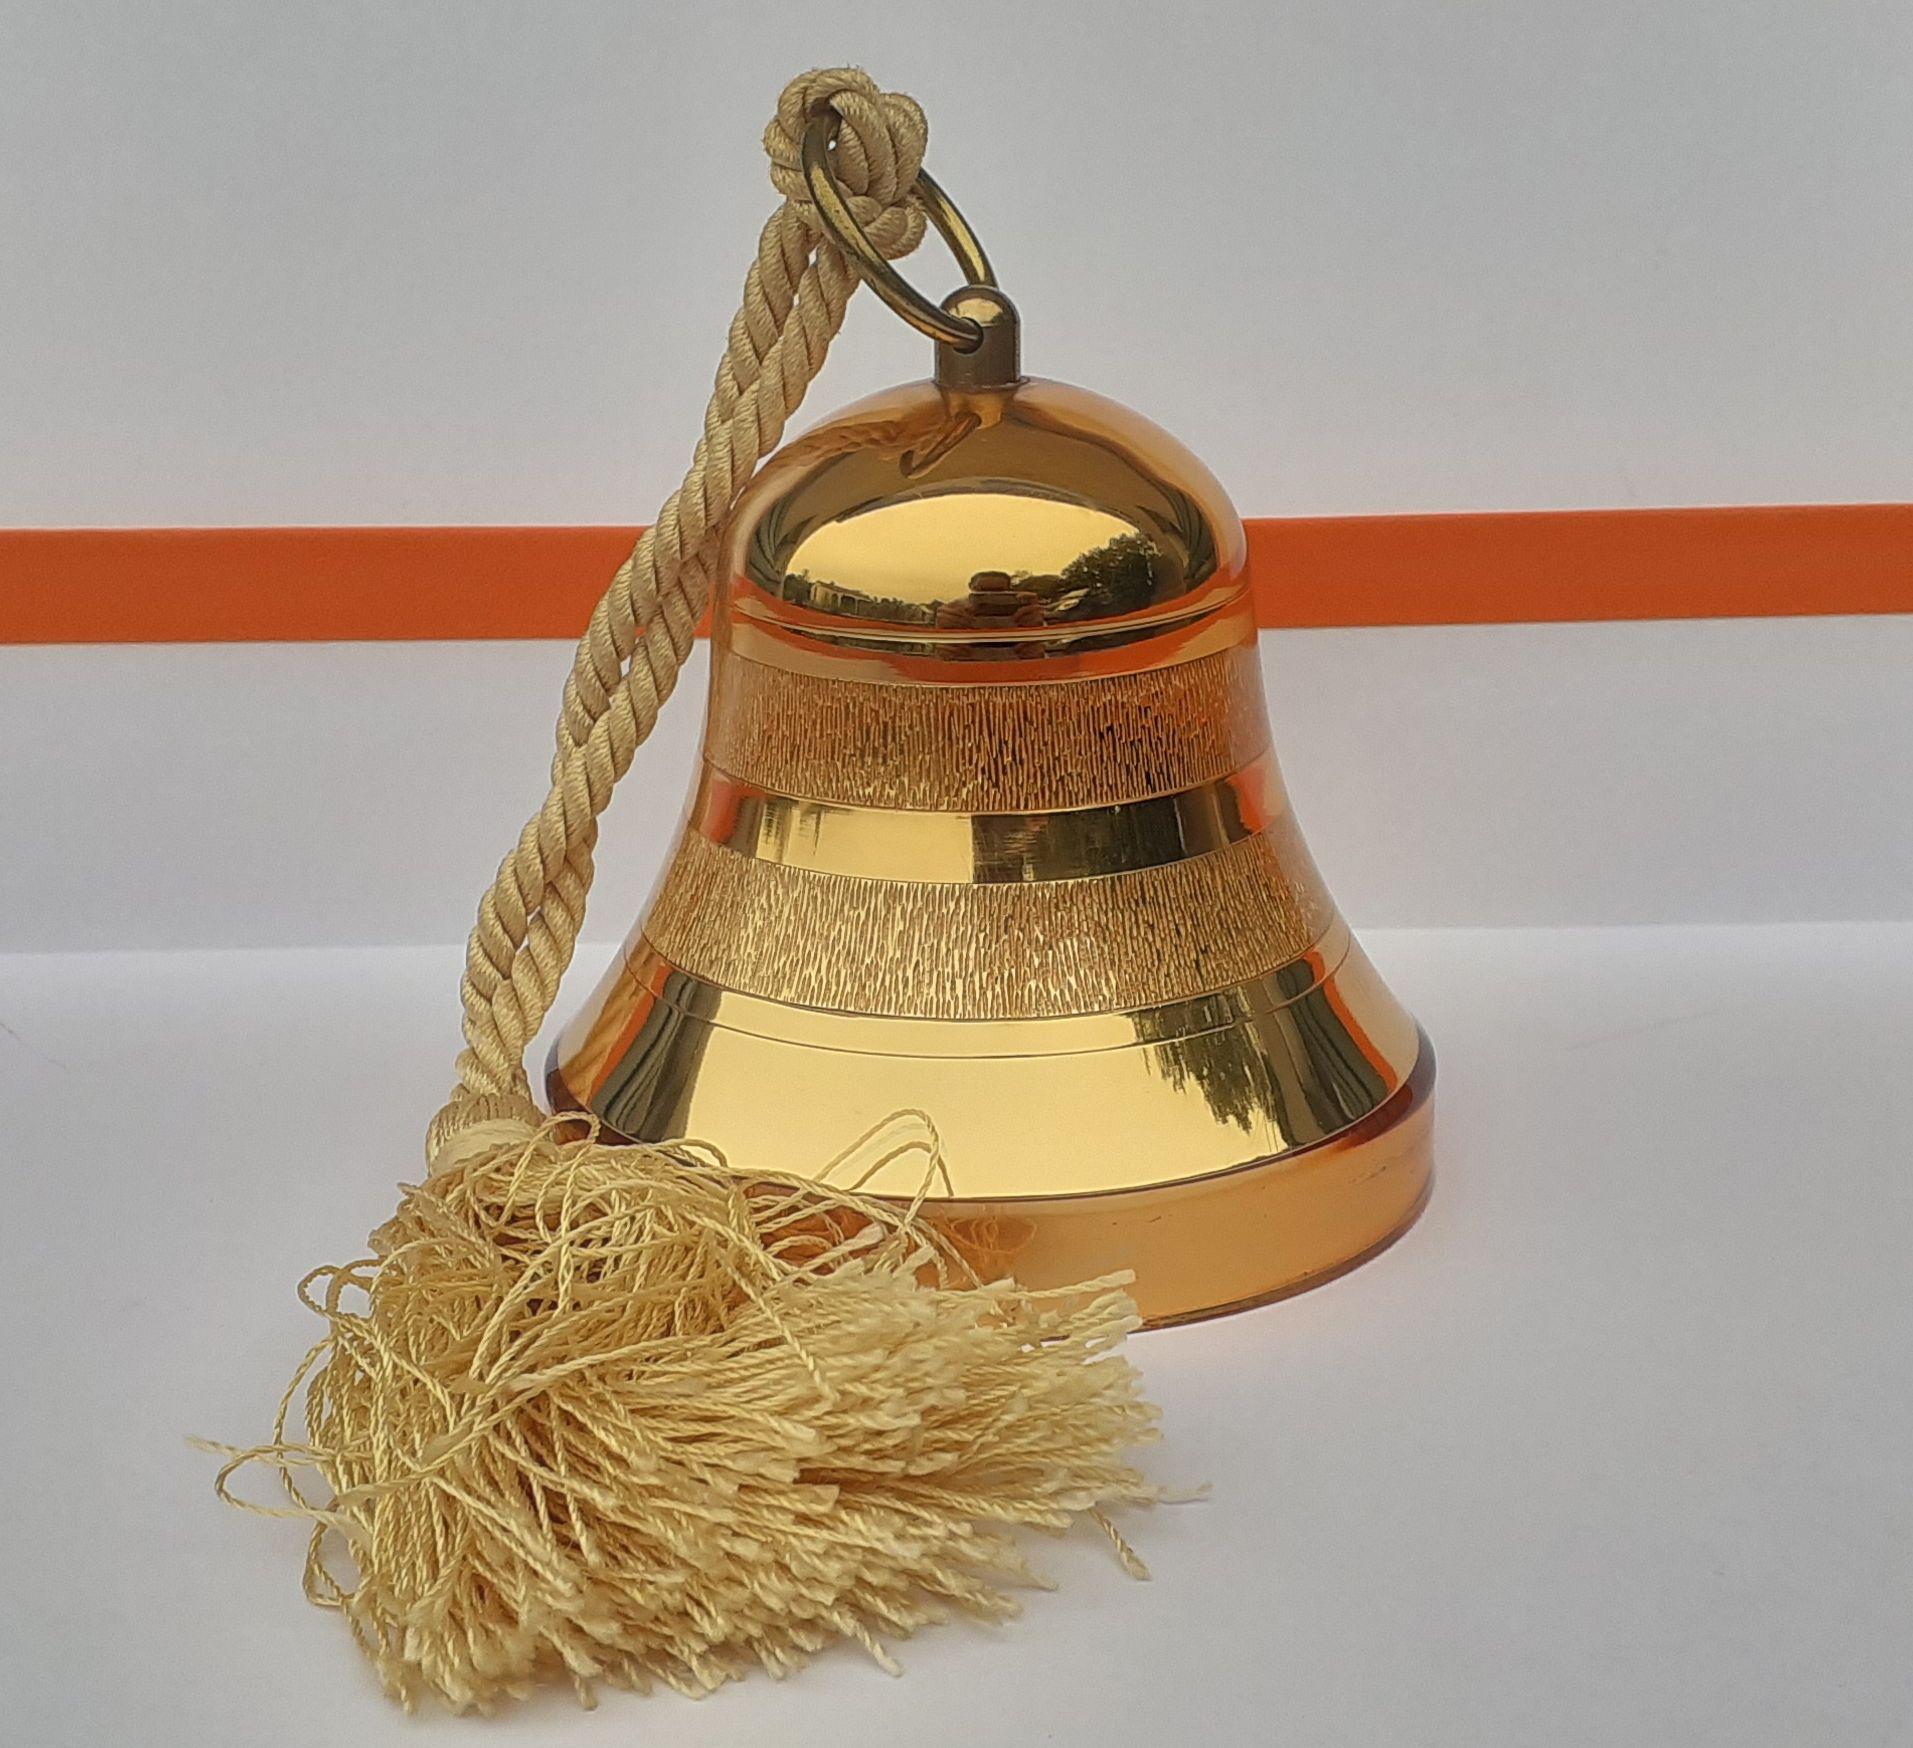 Beautiful Rare Reuge Music Box

Christmas ornament, Bell shaped

Turn the key, pull the button and hang the bell in your tree. There you go, it's Christmas!

Bell is made of rigid plastic and golden metal

Adorned with a pretty little rope and pale